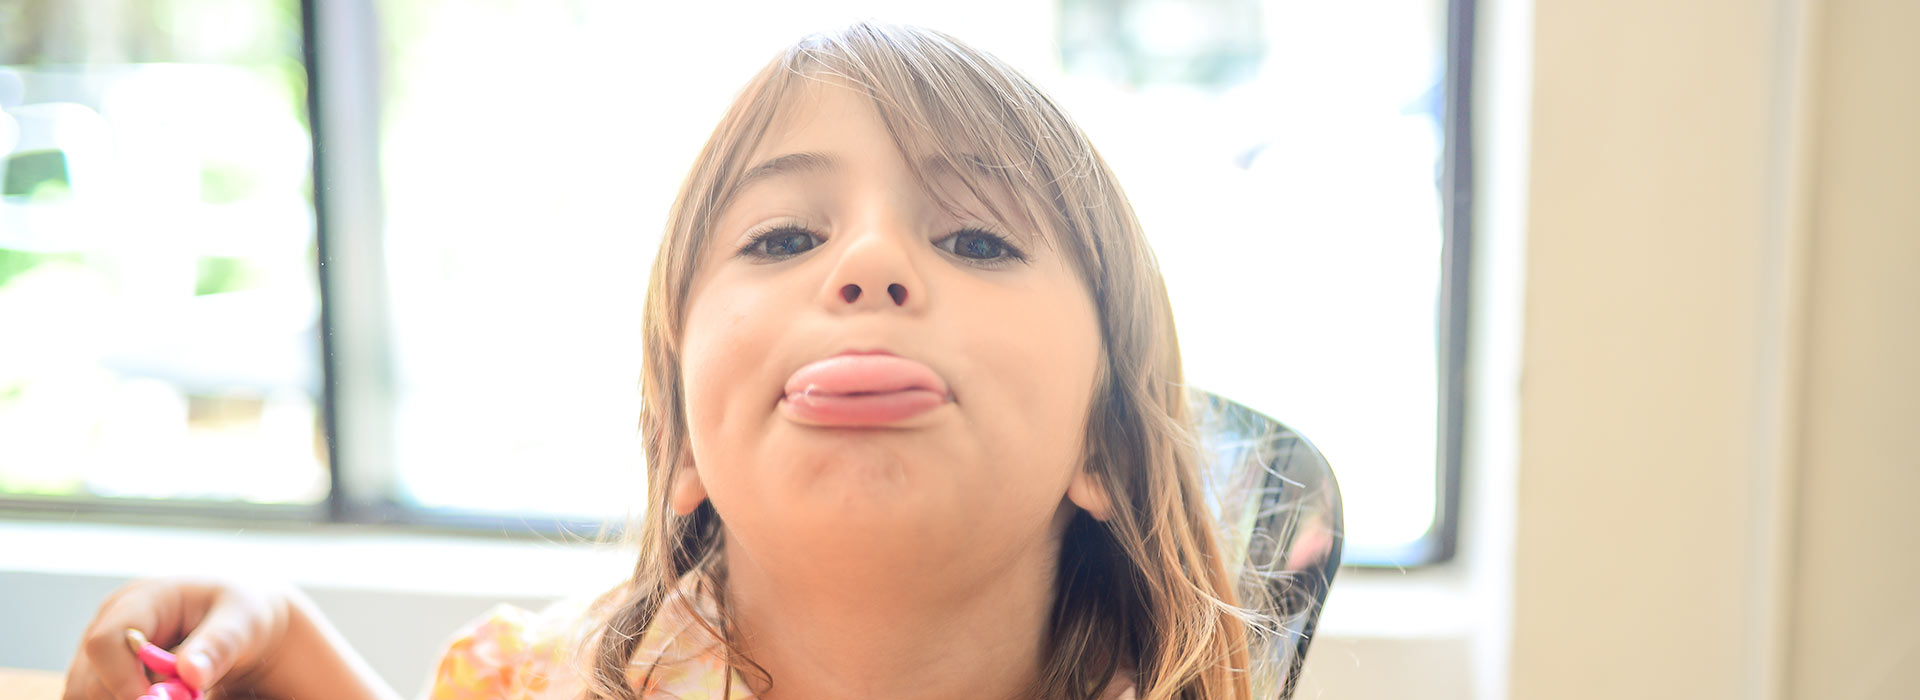 Young girl poking her tongue out